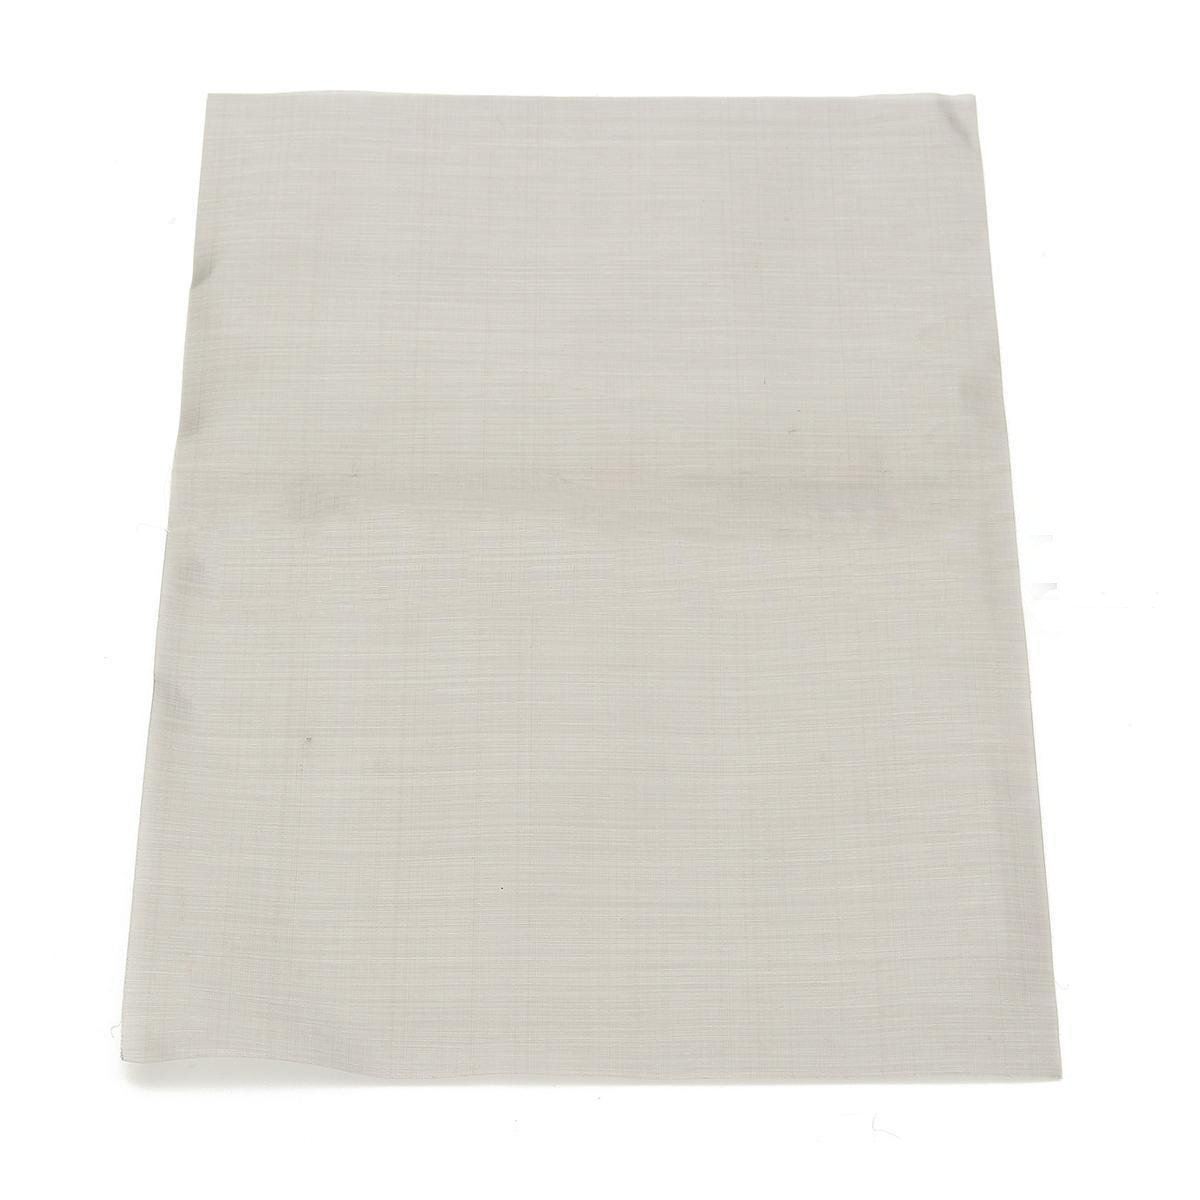 1pc 180/300/325/400 Mesh Stainless Steel Woven Wire Mayitr Durable Silver Screening Sheet Filter 30cm*20cm